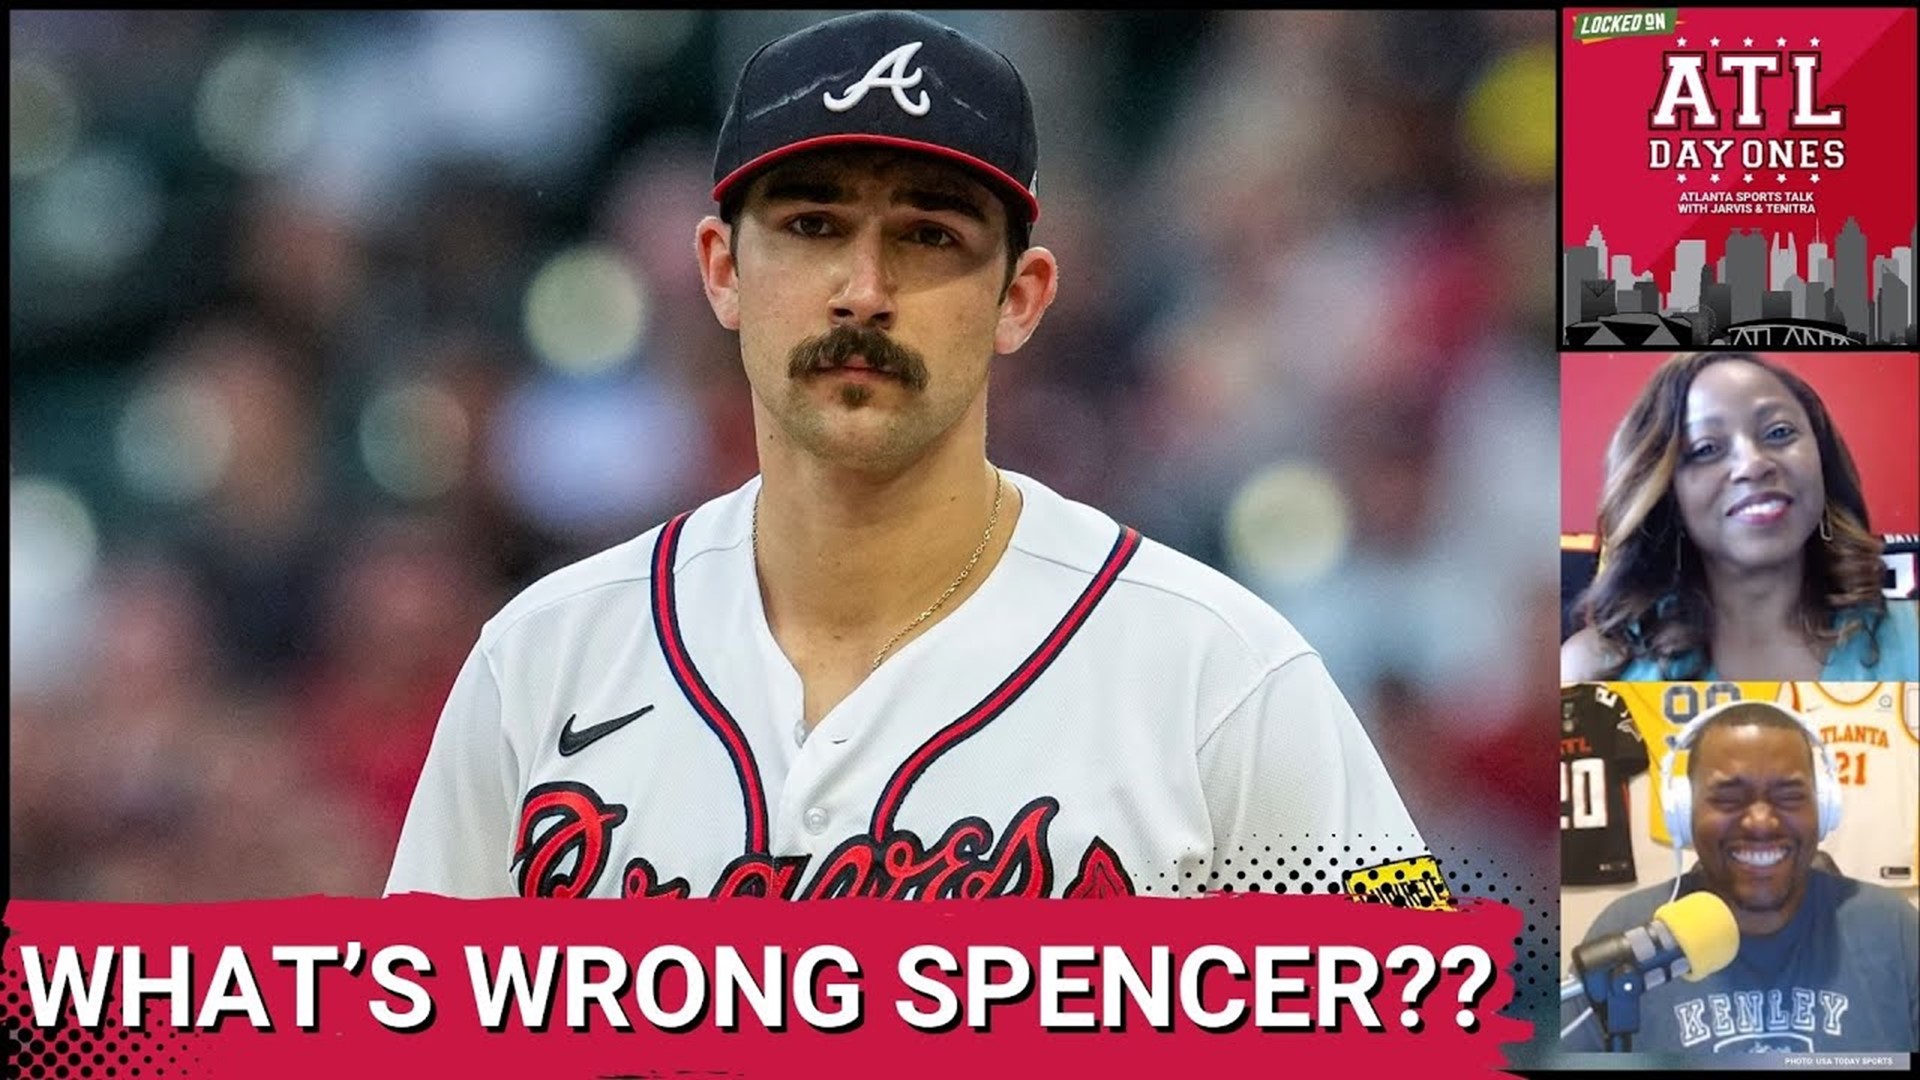 Spencer Strider continued an interesting trend last night against the St. Louis Cardinals. Strider had a terrible outing for the Atlanta Braves only going 2 ⅔ inning